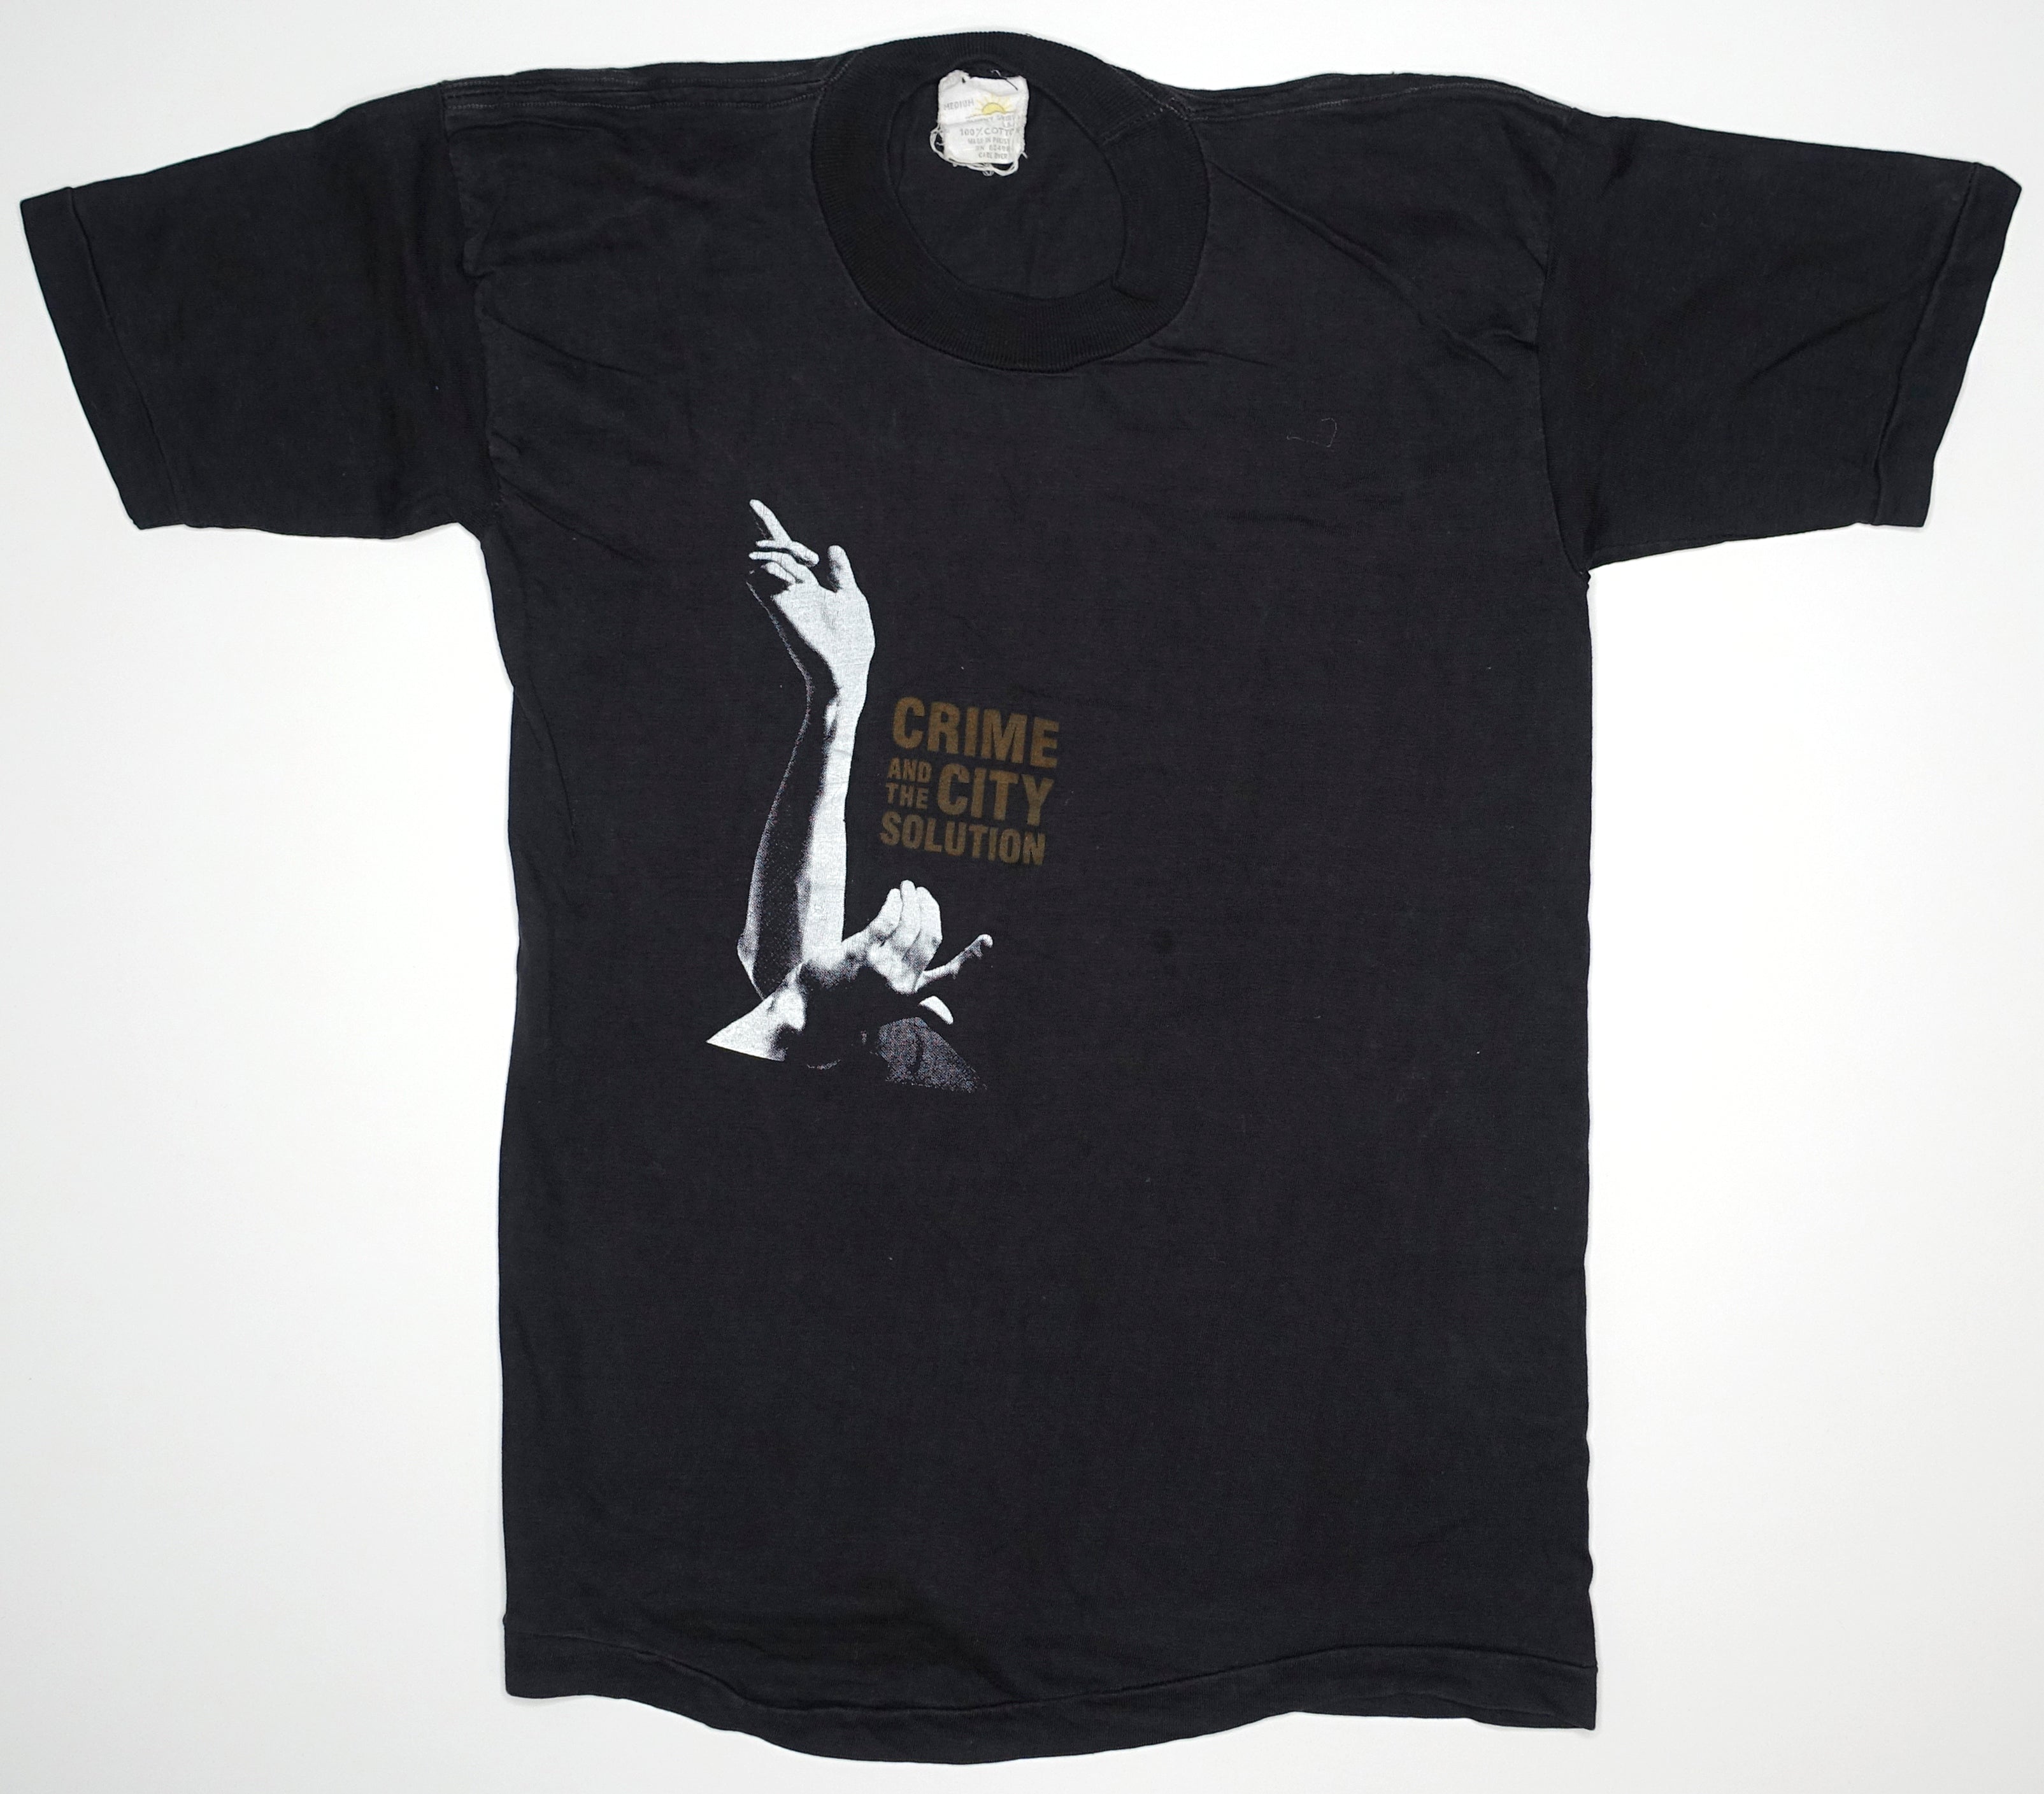 Crime And The City Solution - Concert Shirt Size Small